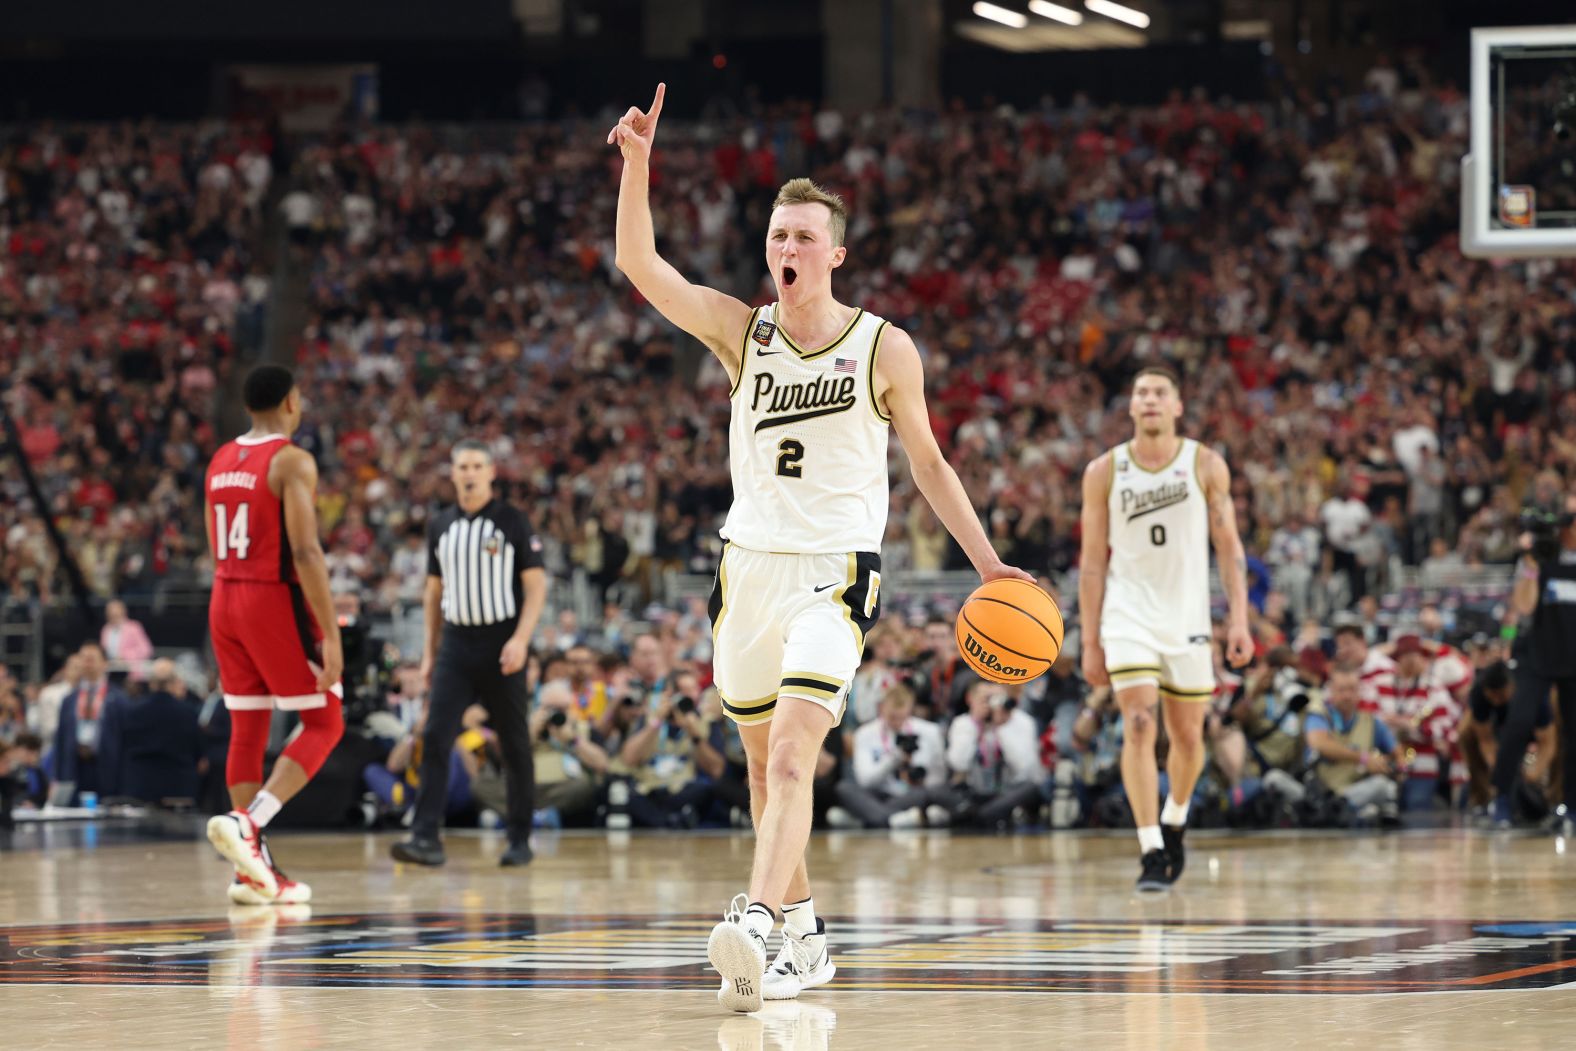 Purdue's Fletcher Loyer celebrates after beating the North Carolina State Wolfpack 63-50.